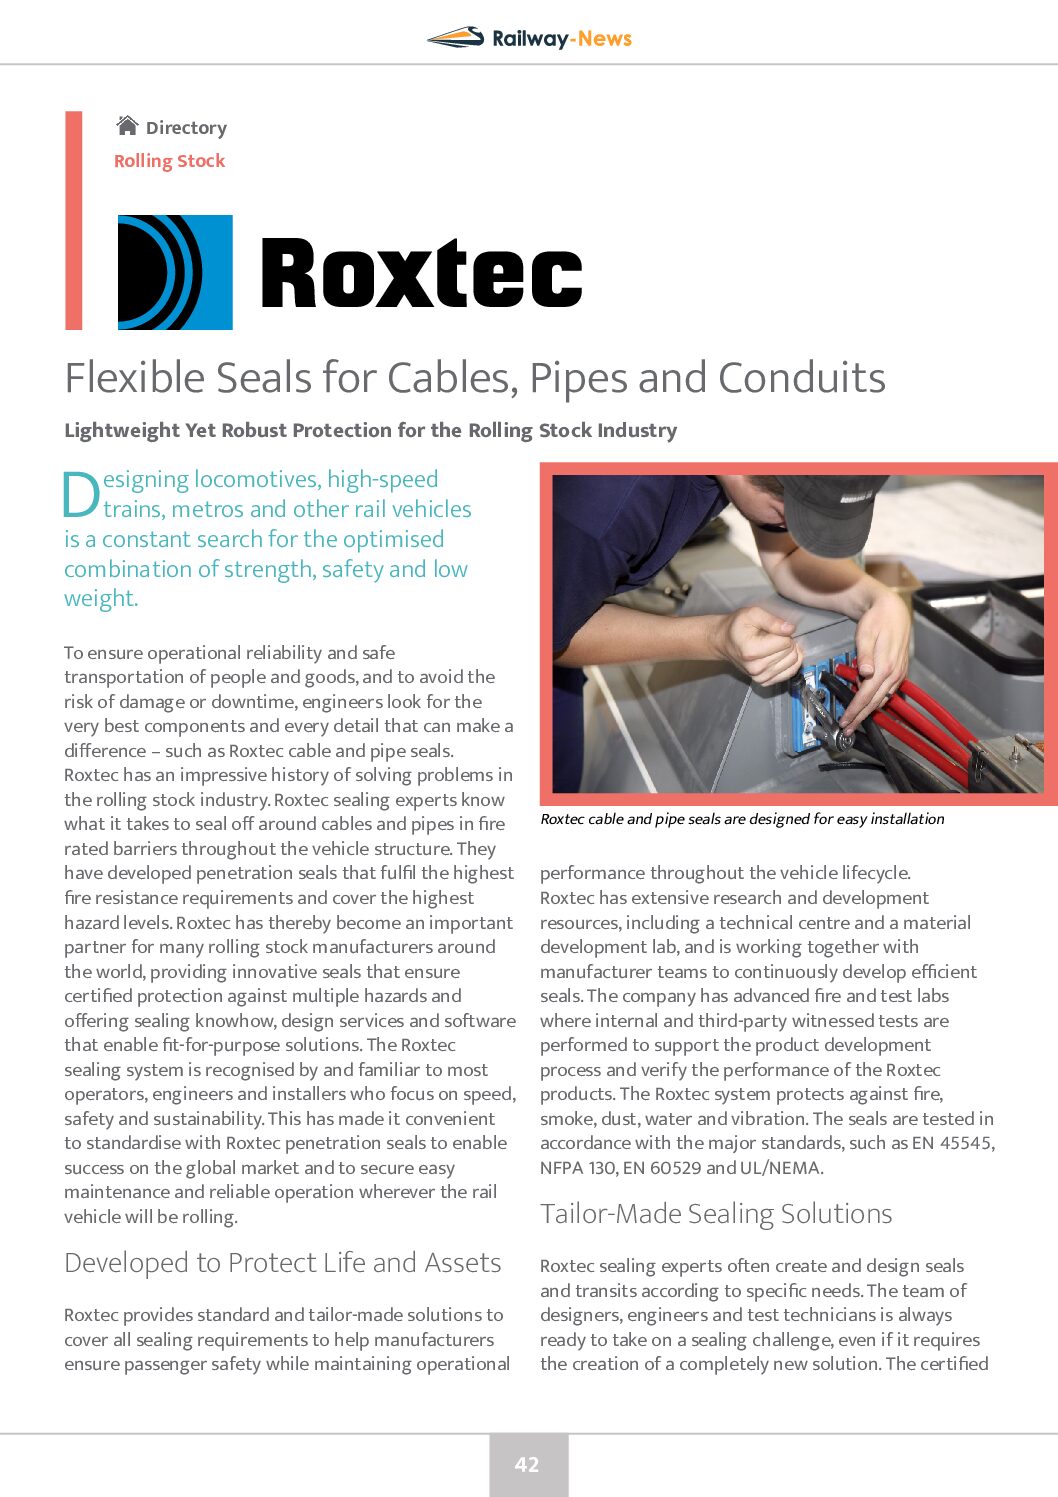 Flexible Seals for Cables, Pipes and Conduits